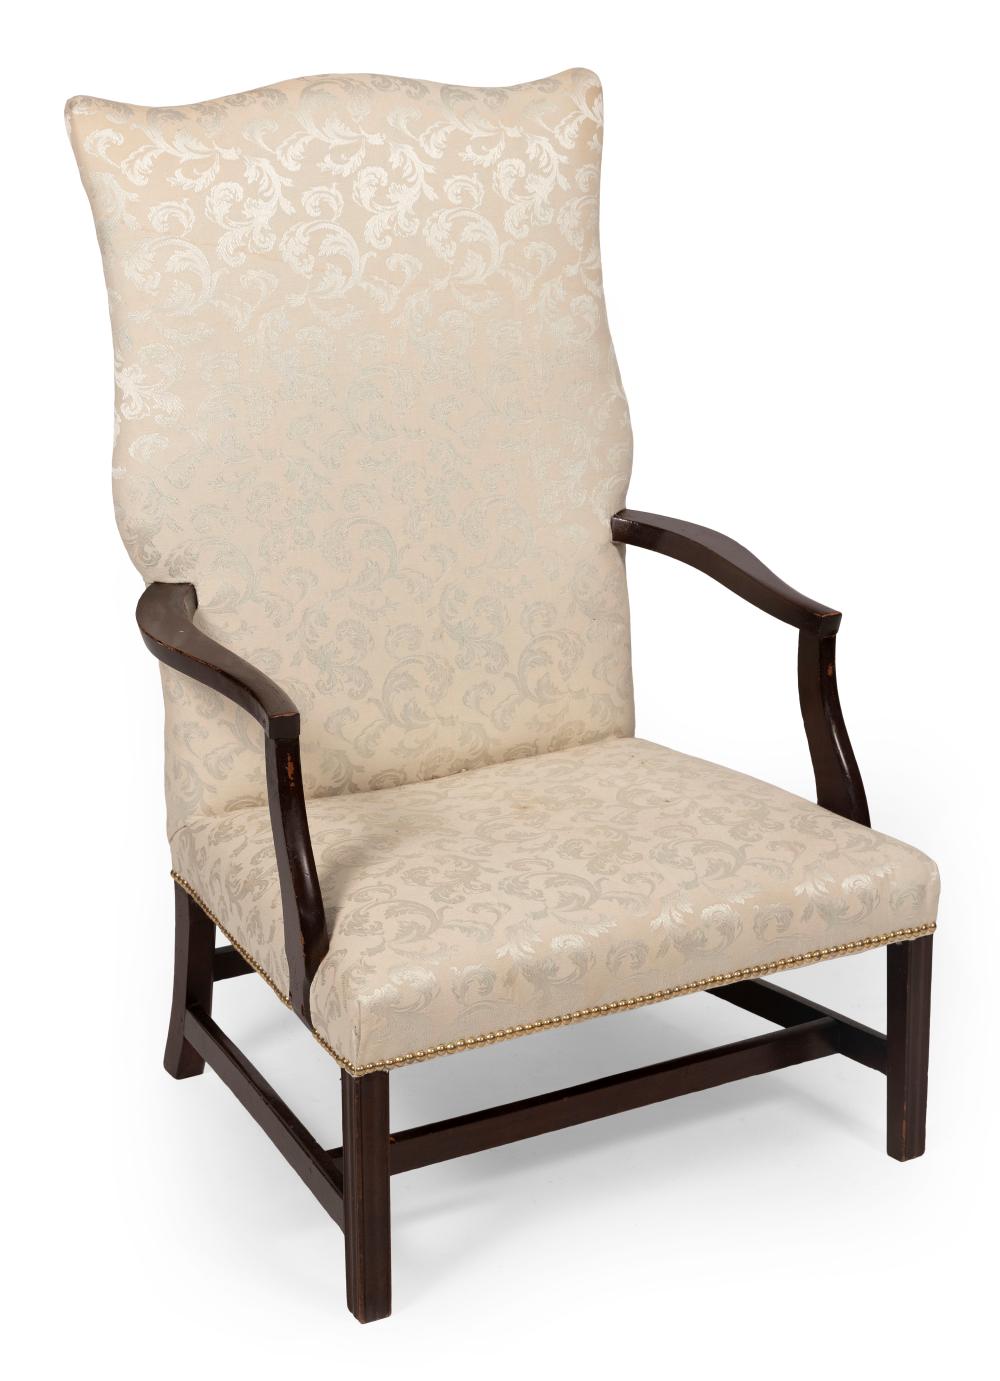 CHIPPENDALE LOLLING CHAIR AMERICA  3507fe